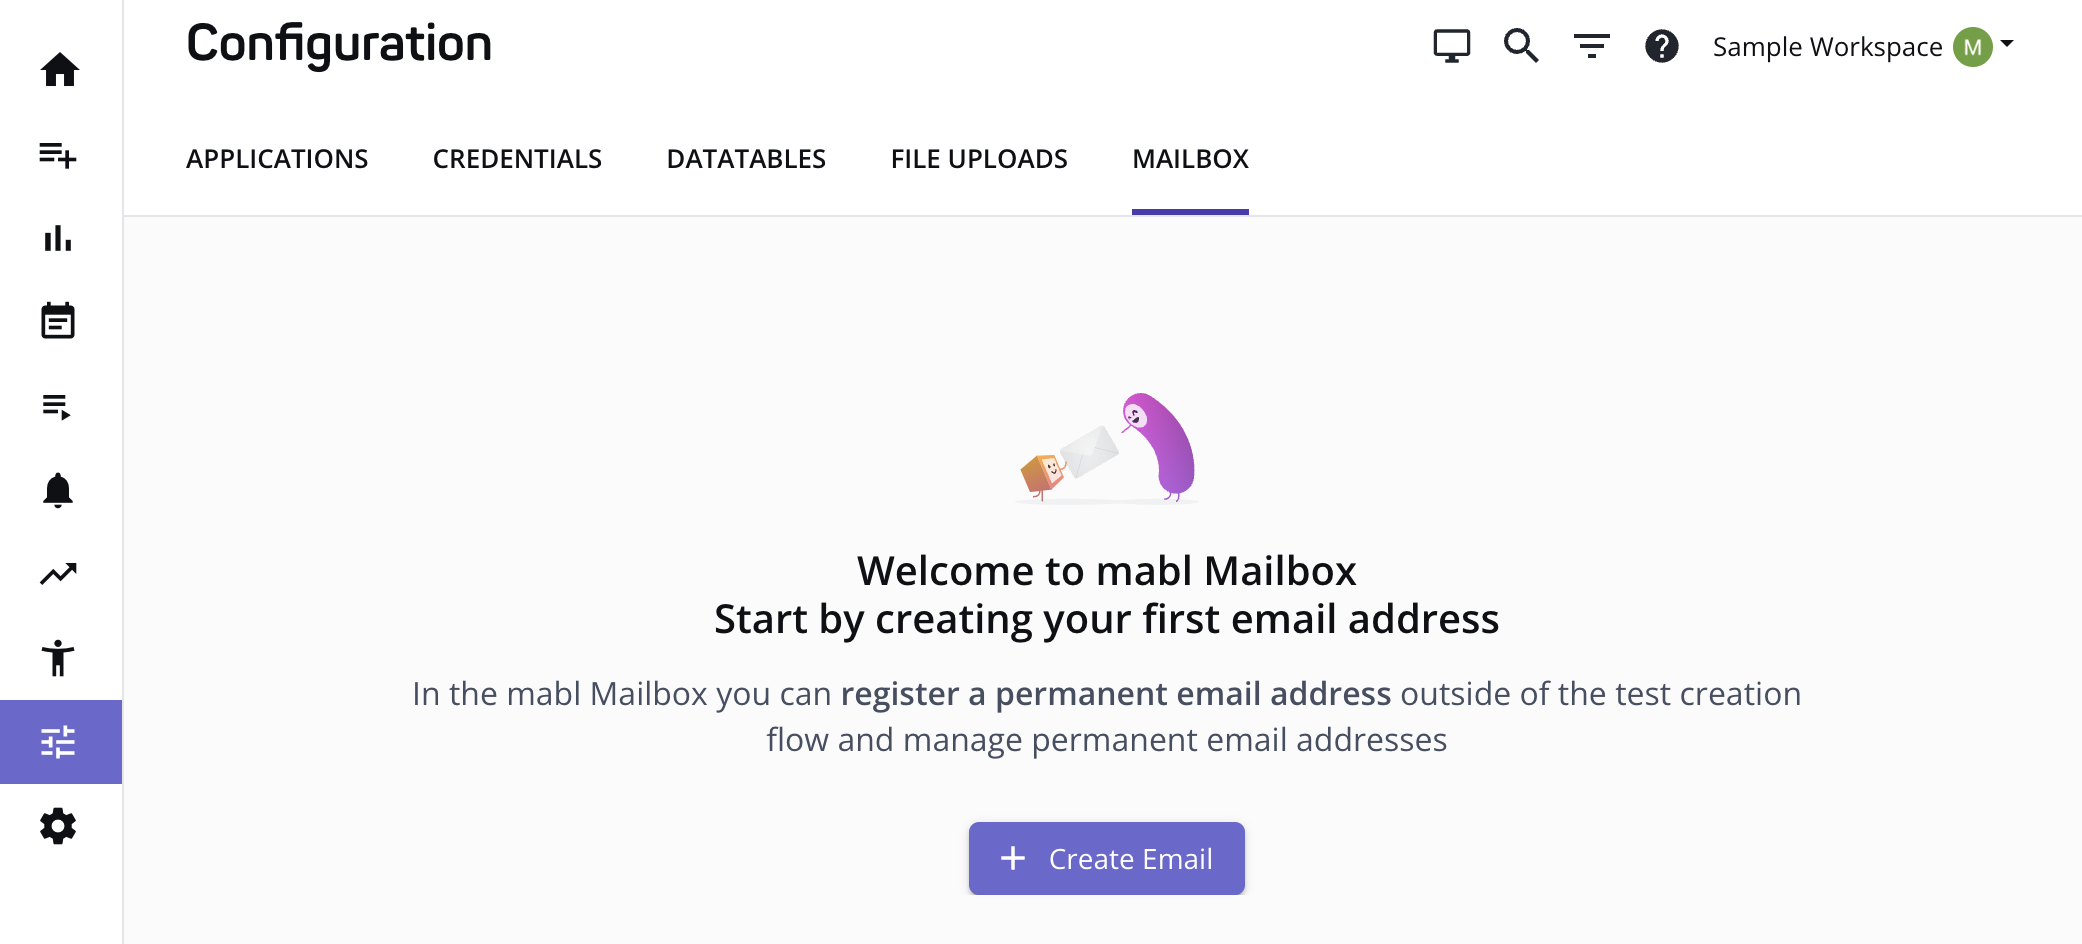 The Mailbox page